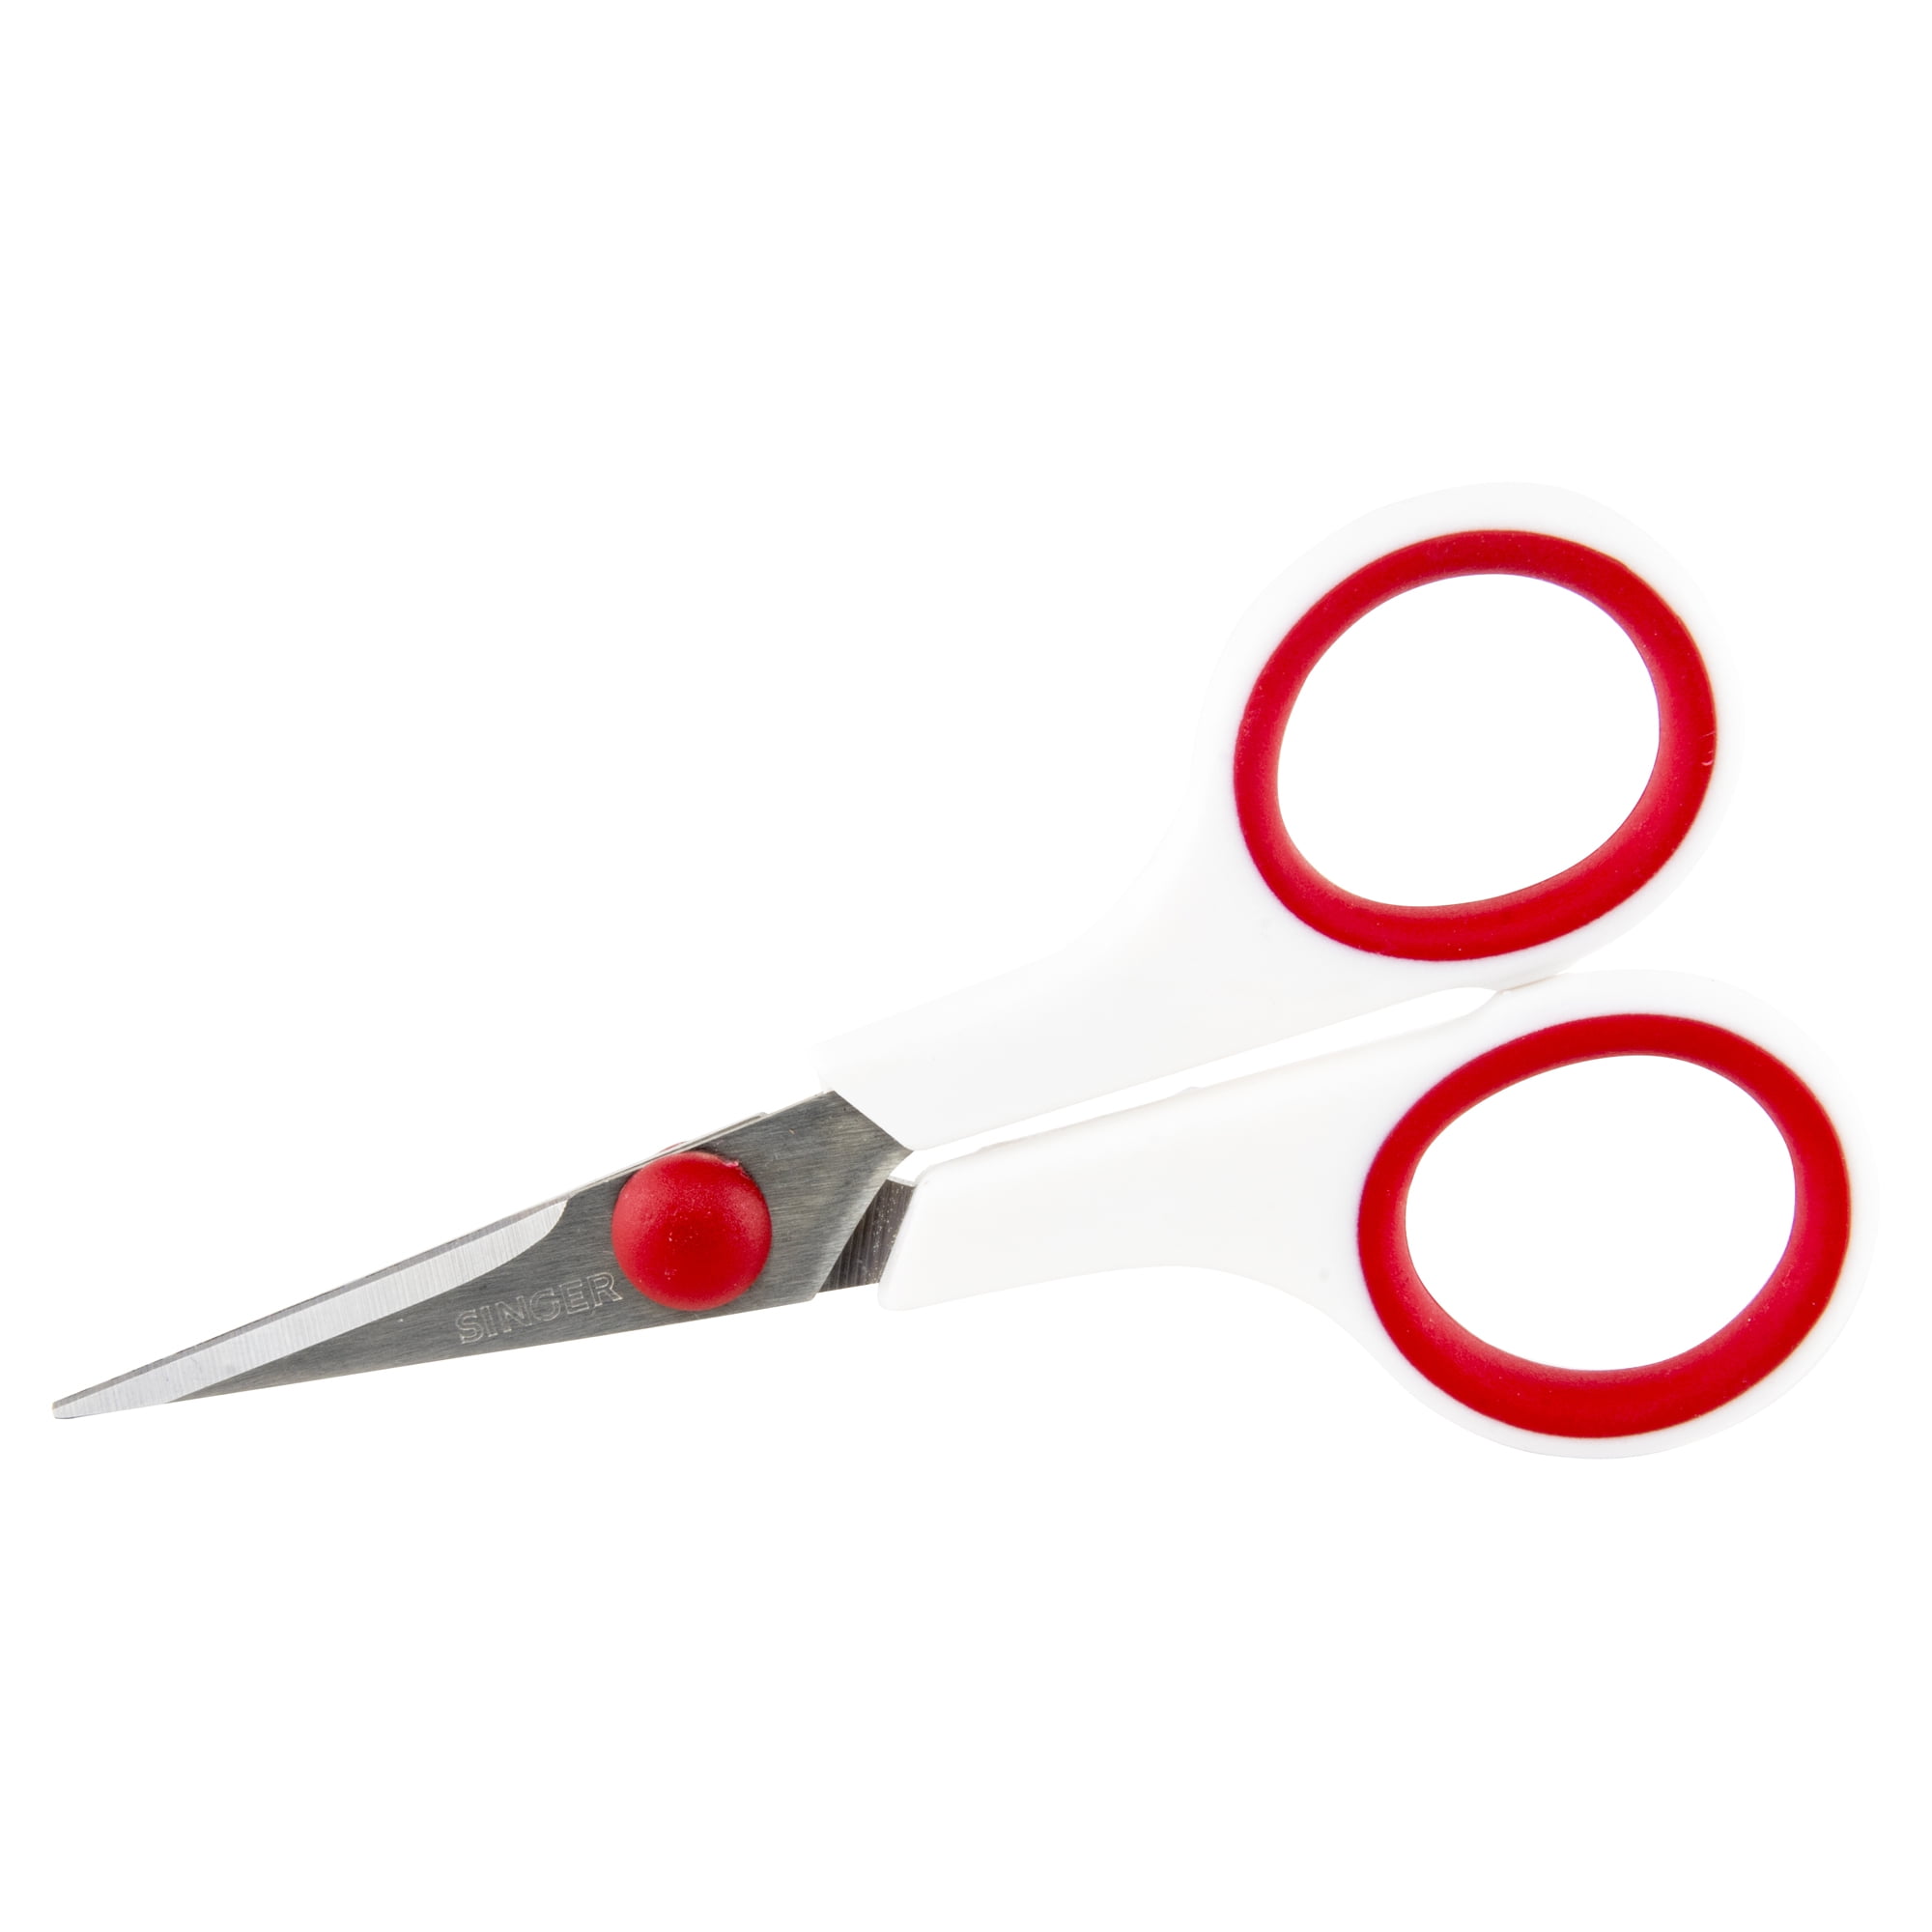 Scissors, Classy Sewing Embroidery Scissors - Blackside Finish – The Singer  Featherweight Shop